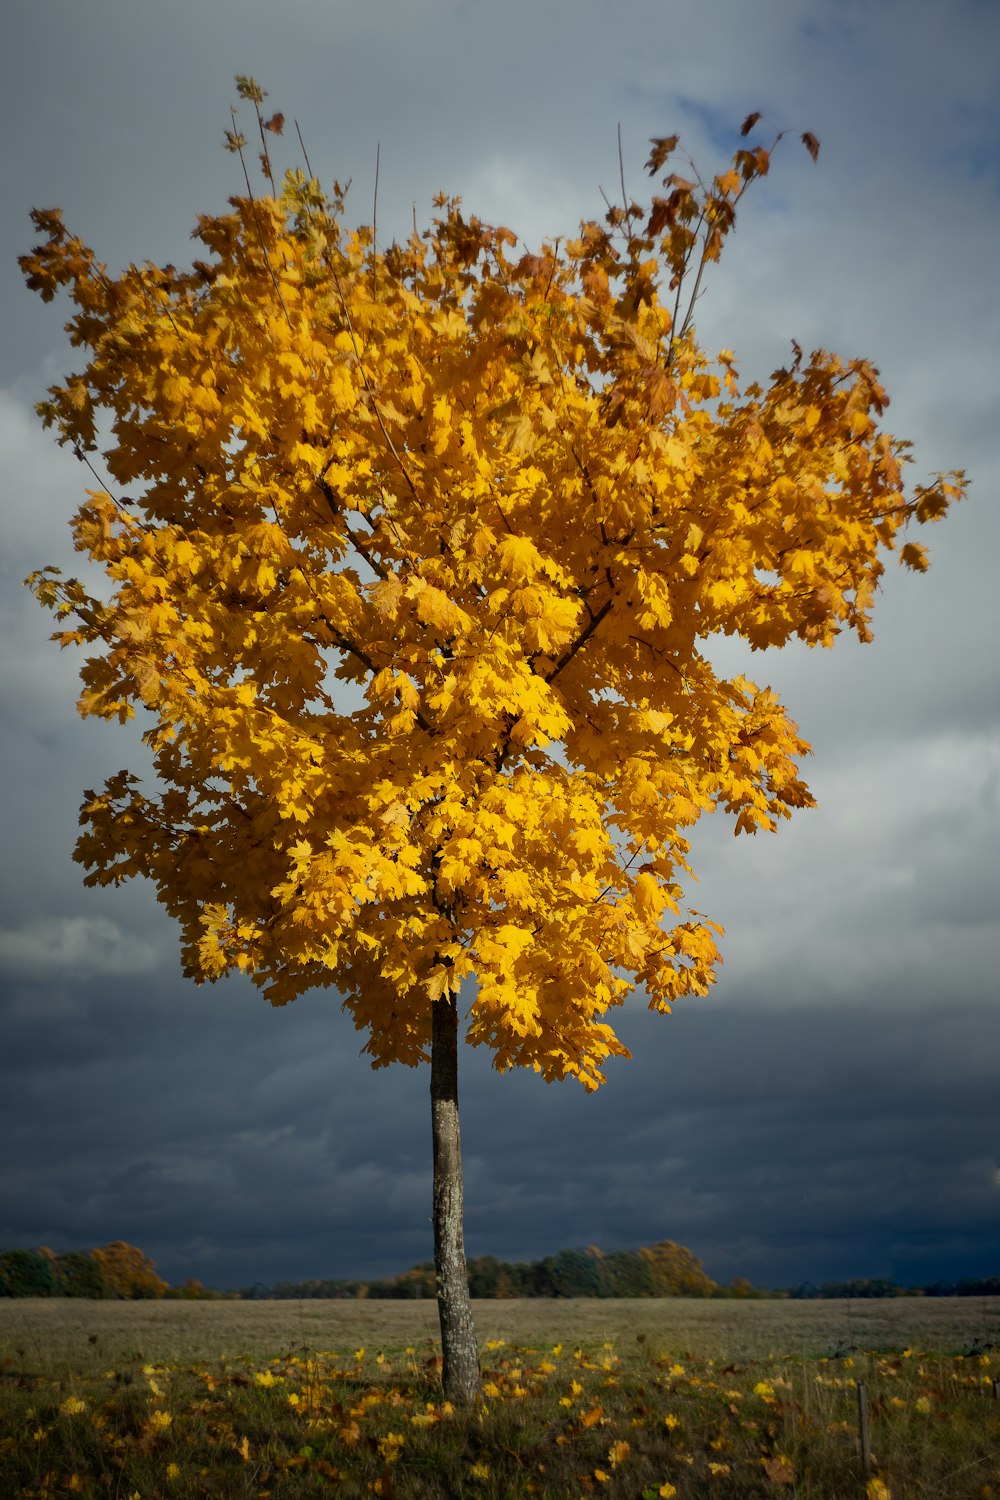 yellow leaf tree under cloudy sky during daytime